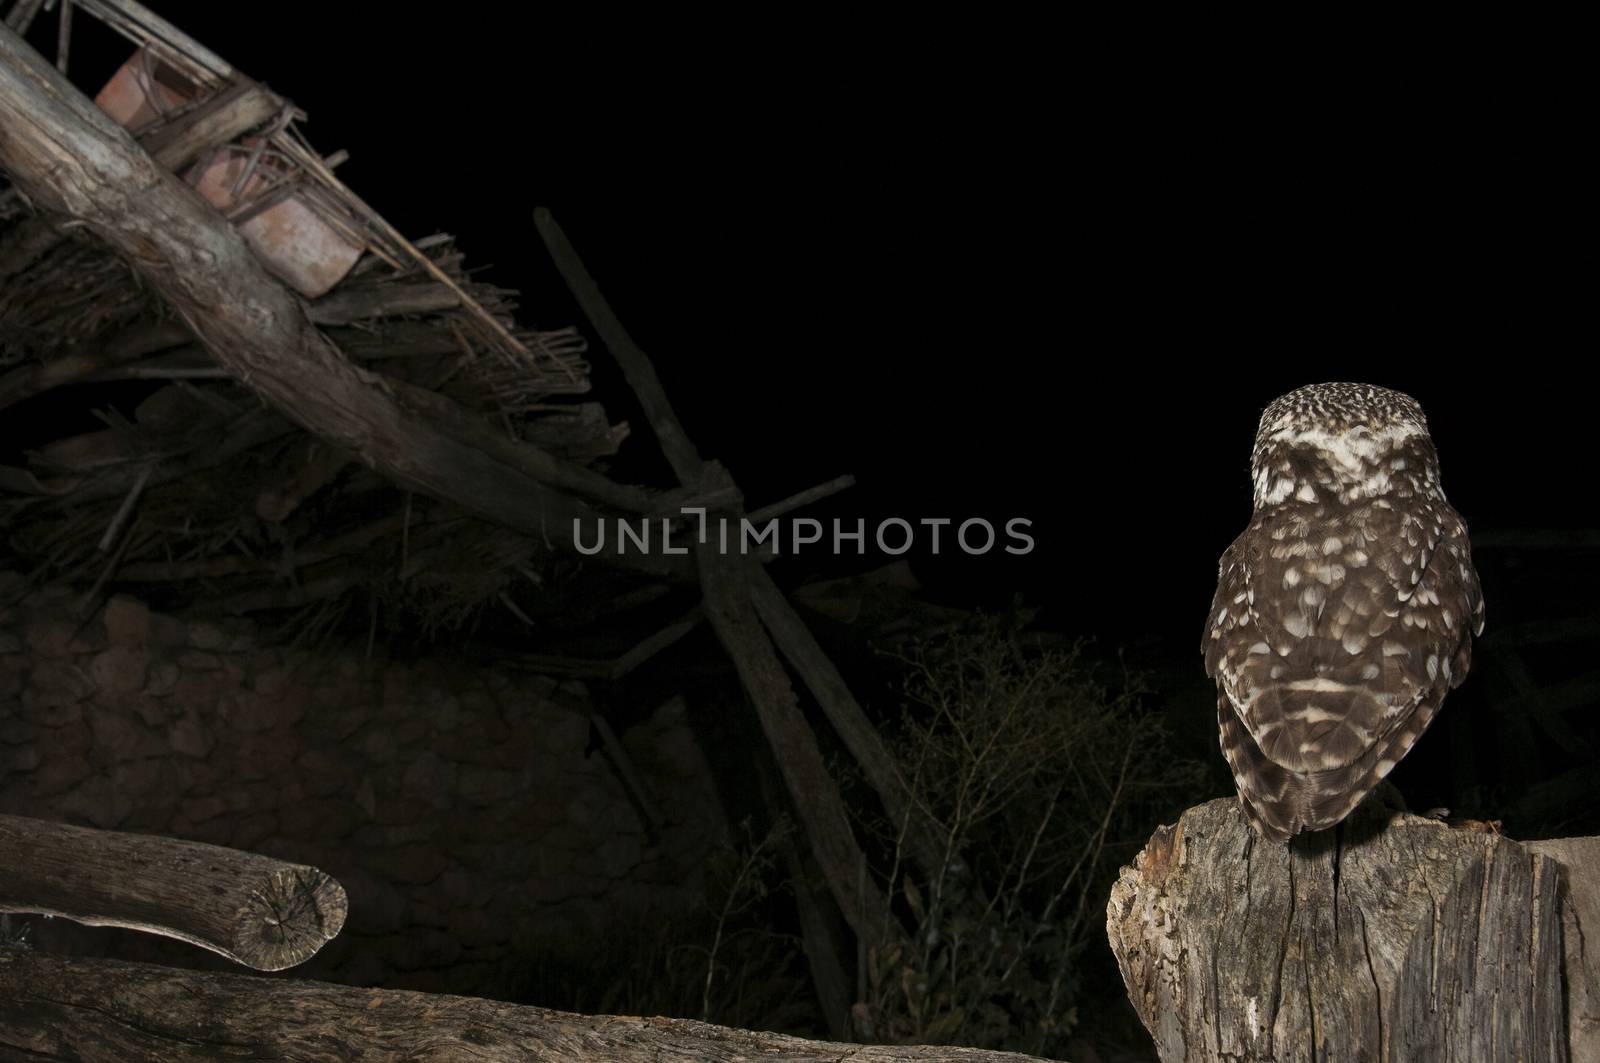 Athene noctua owl, perched on stick of an old ruined house, Litt by jalonsohu@gmail.com